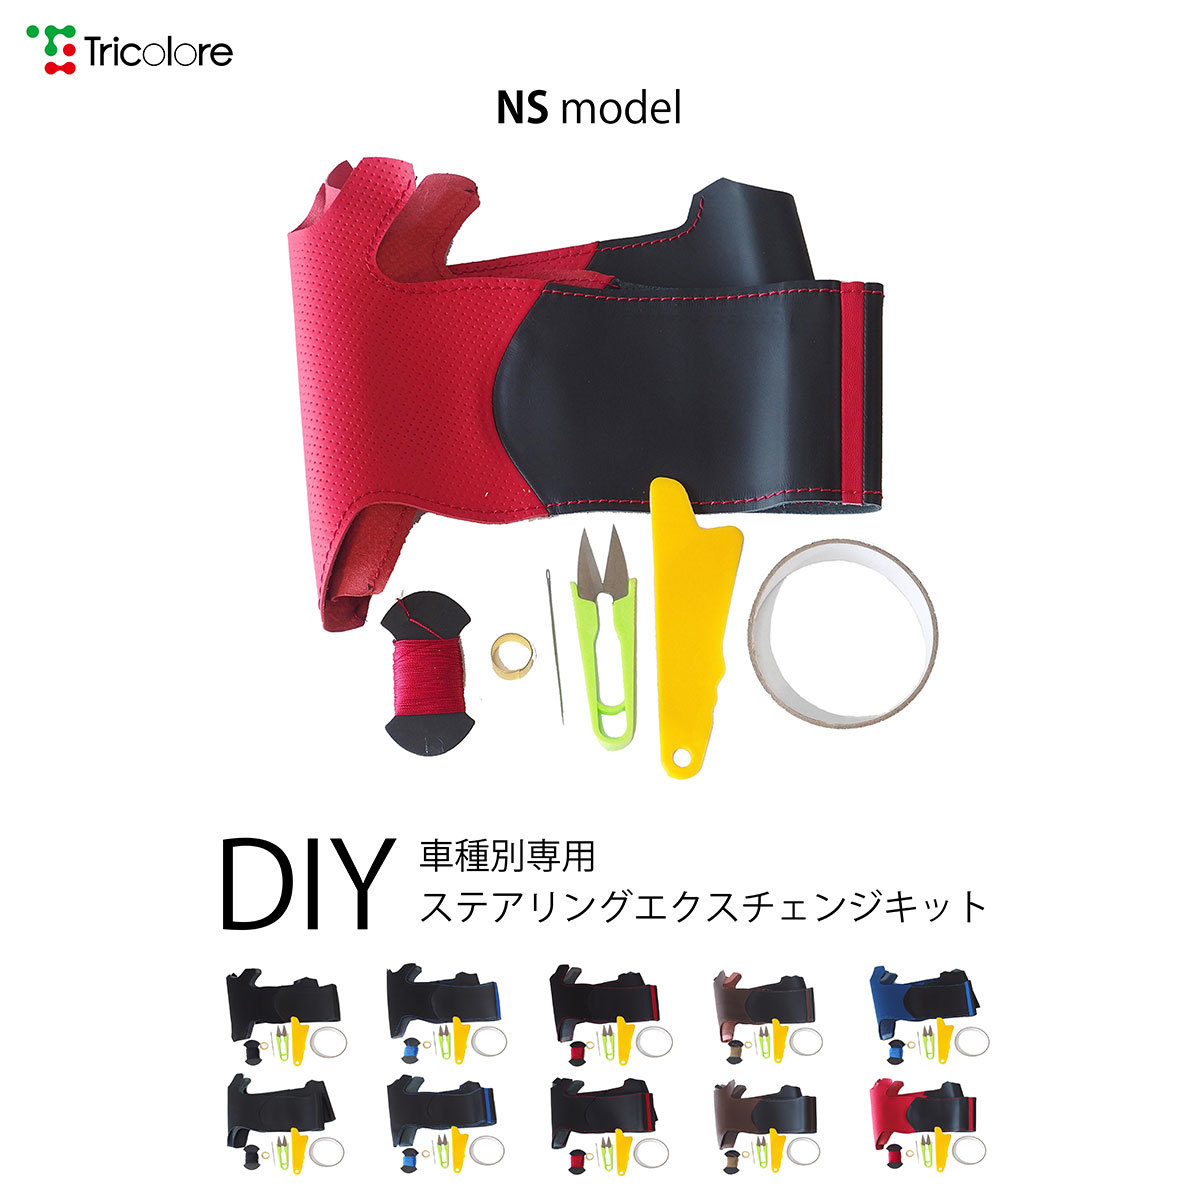  Dias Wagon steering gear S321N S331N 2009/9-2017/10 real leather braid change kit exchange kit Tricolore/toli colore (1D-17 NS